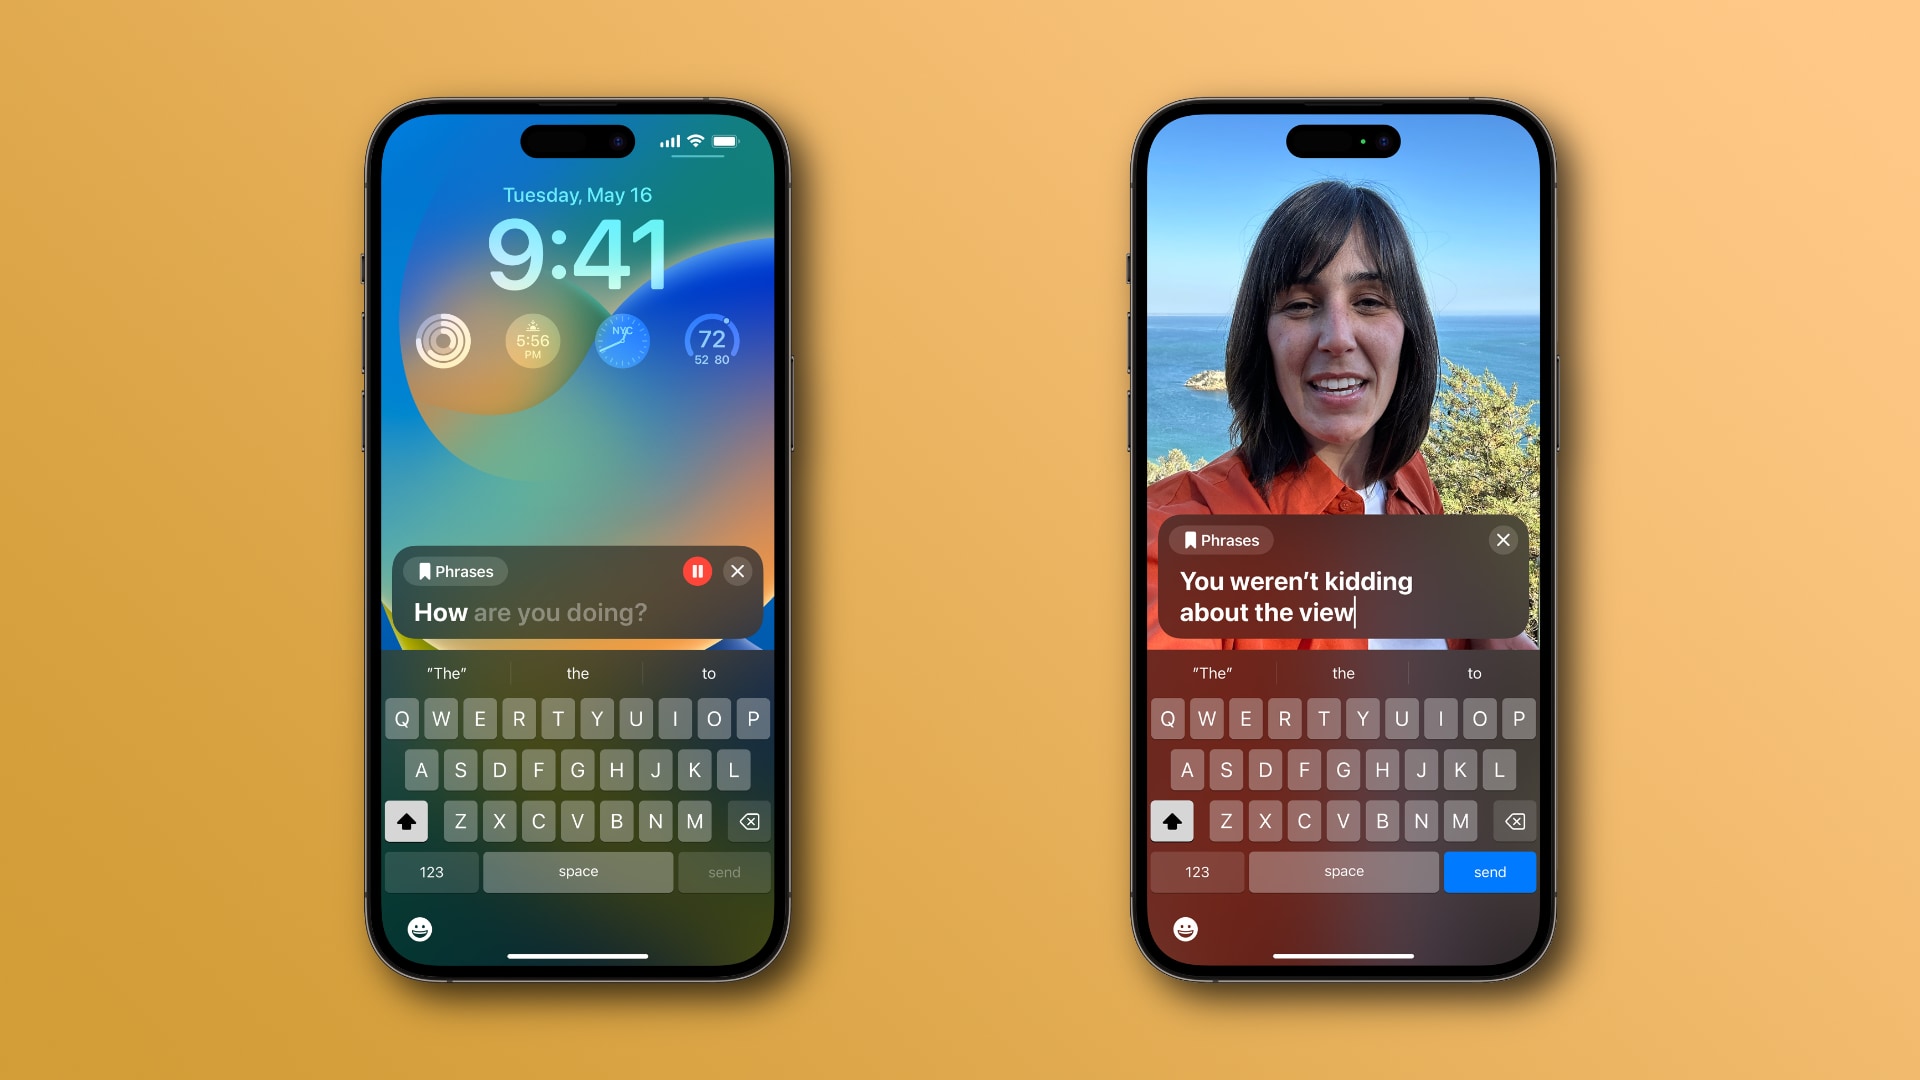 New iOS 17 accessibility features include Personal Voice and Live Speech